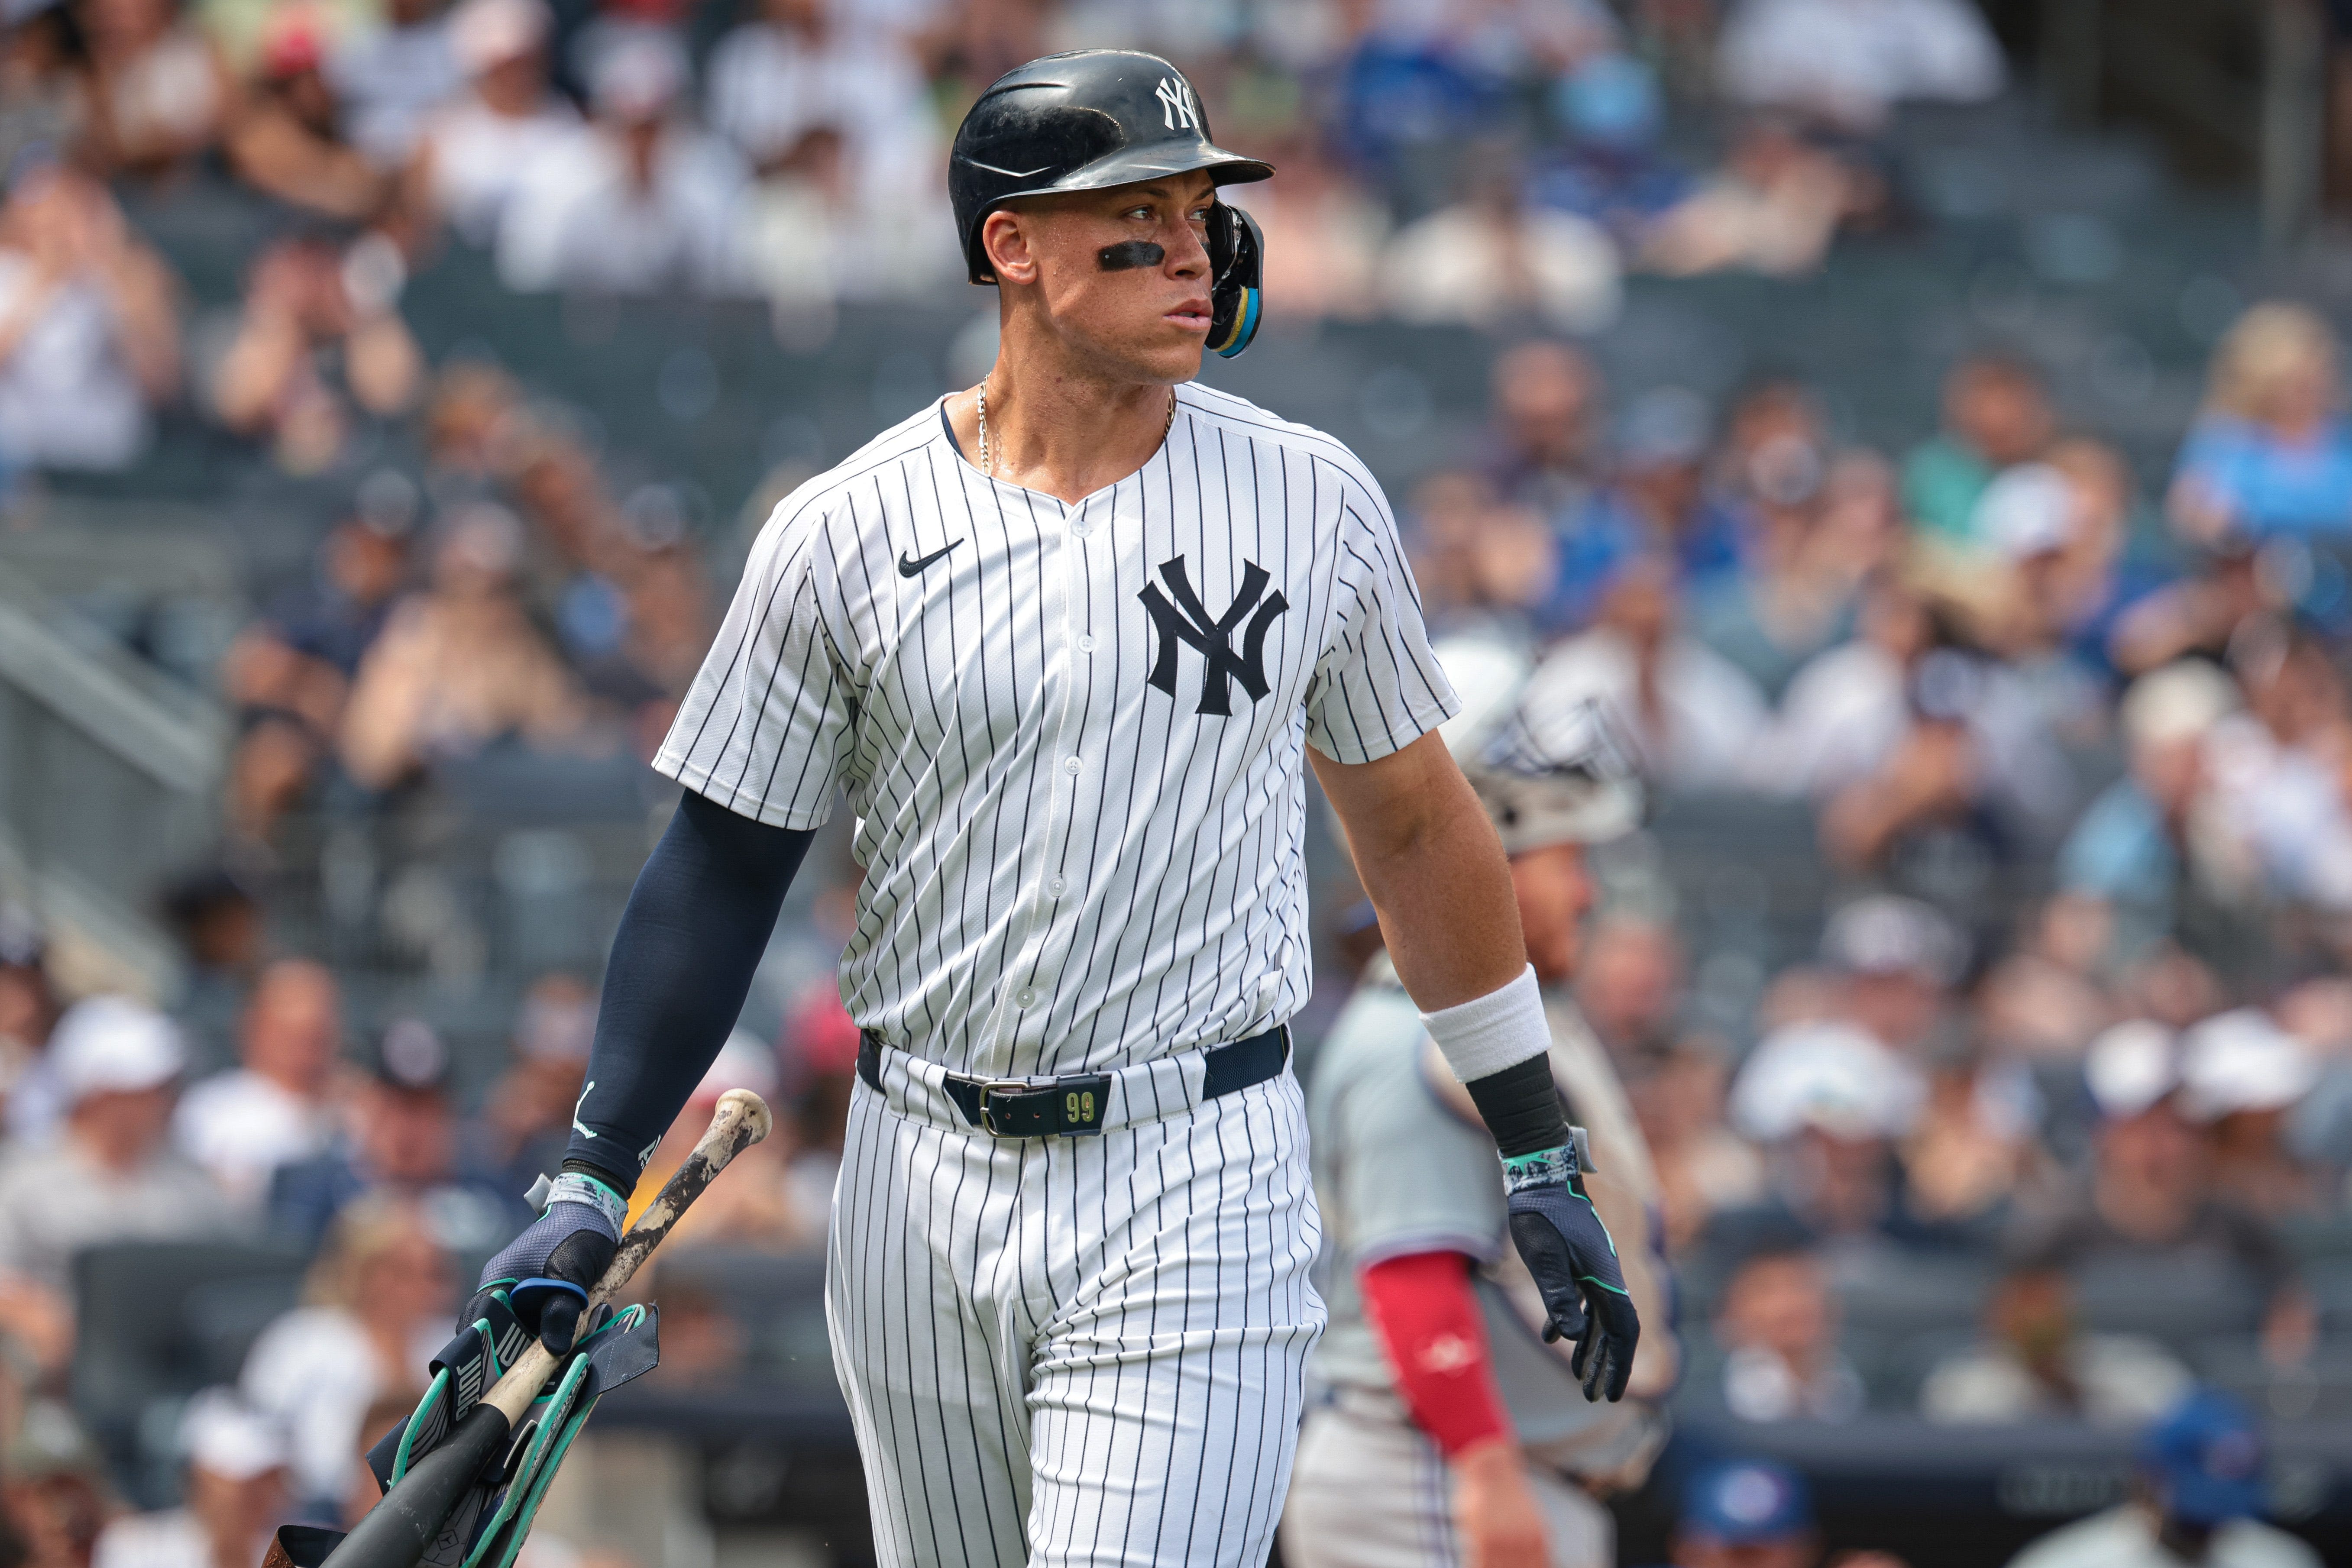 Blue Jays walk Aaron Judge three times but it's DJ LeMahieu who comes through for Yankees